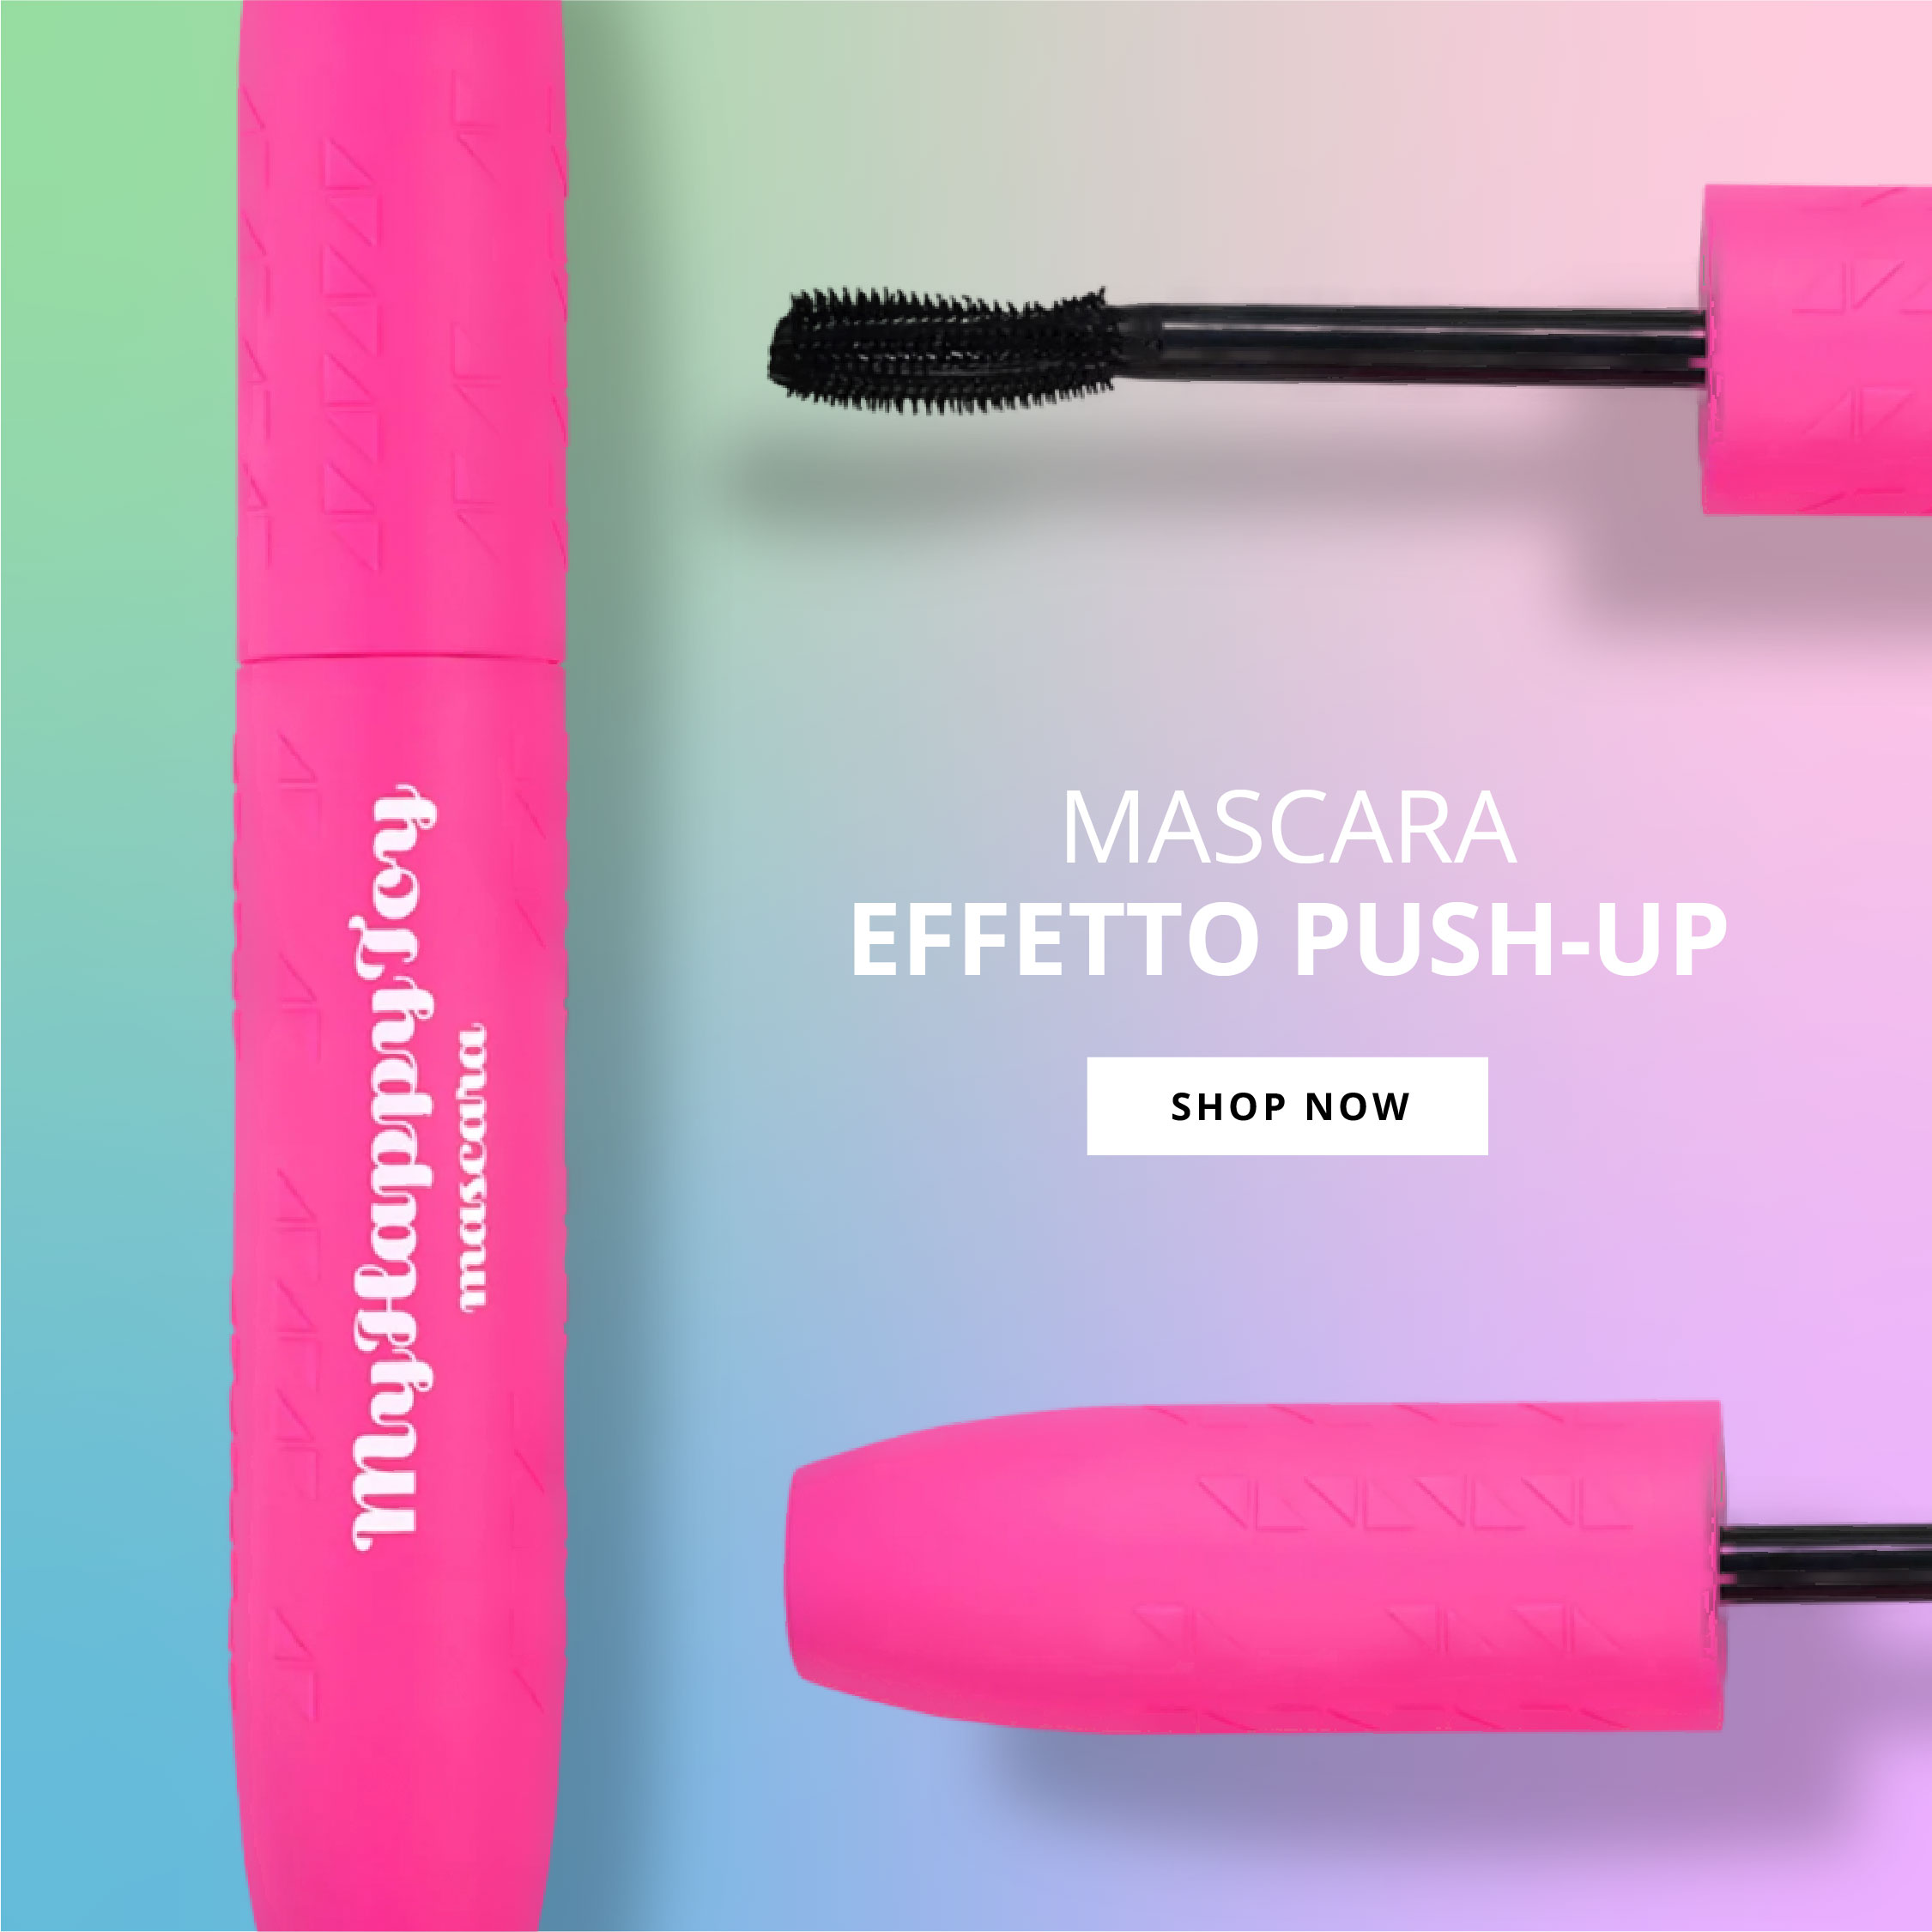 My Happy Toy donna make up mascara - SHOP NOW